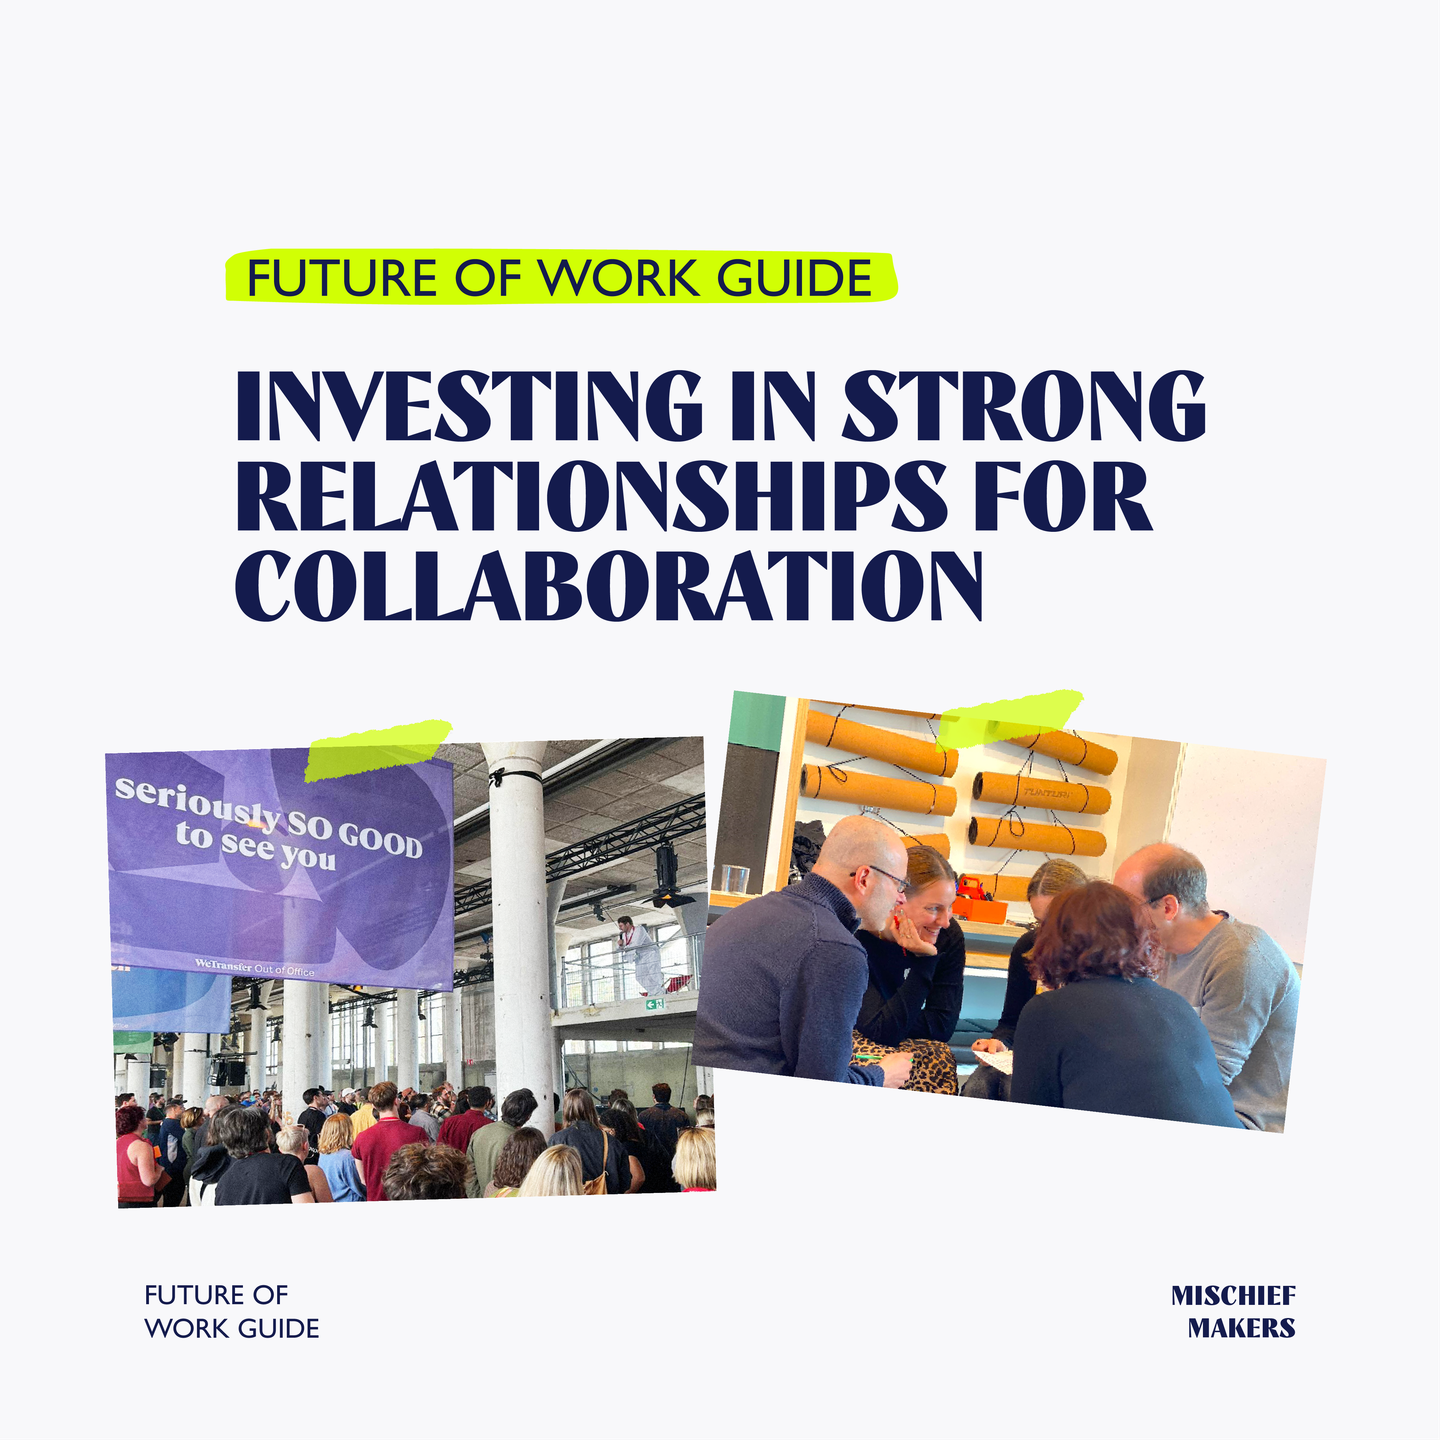 Future of work guide - how to invest in strong relationships for human connections